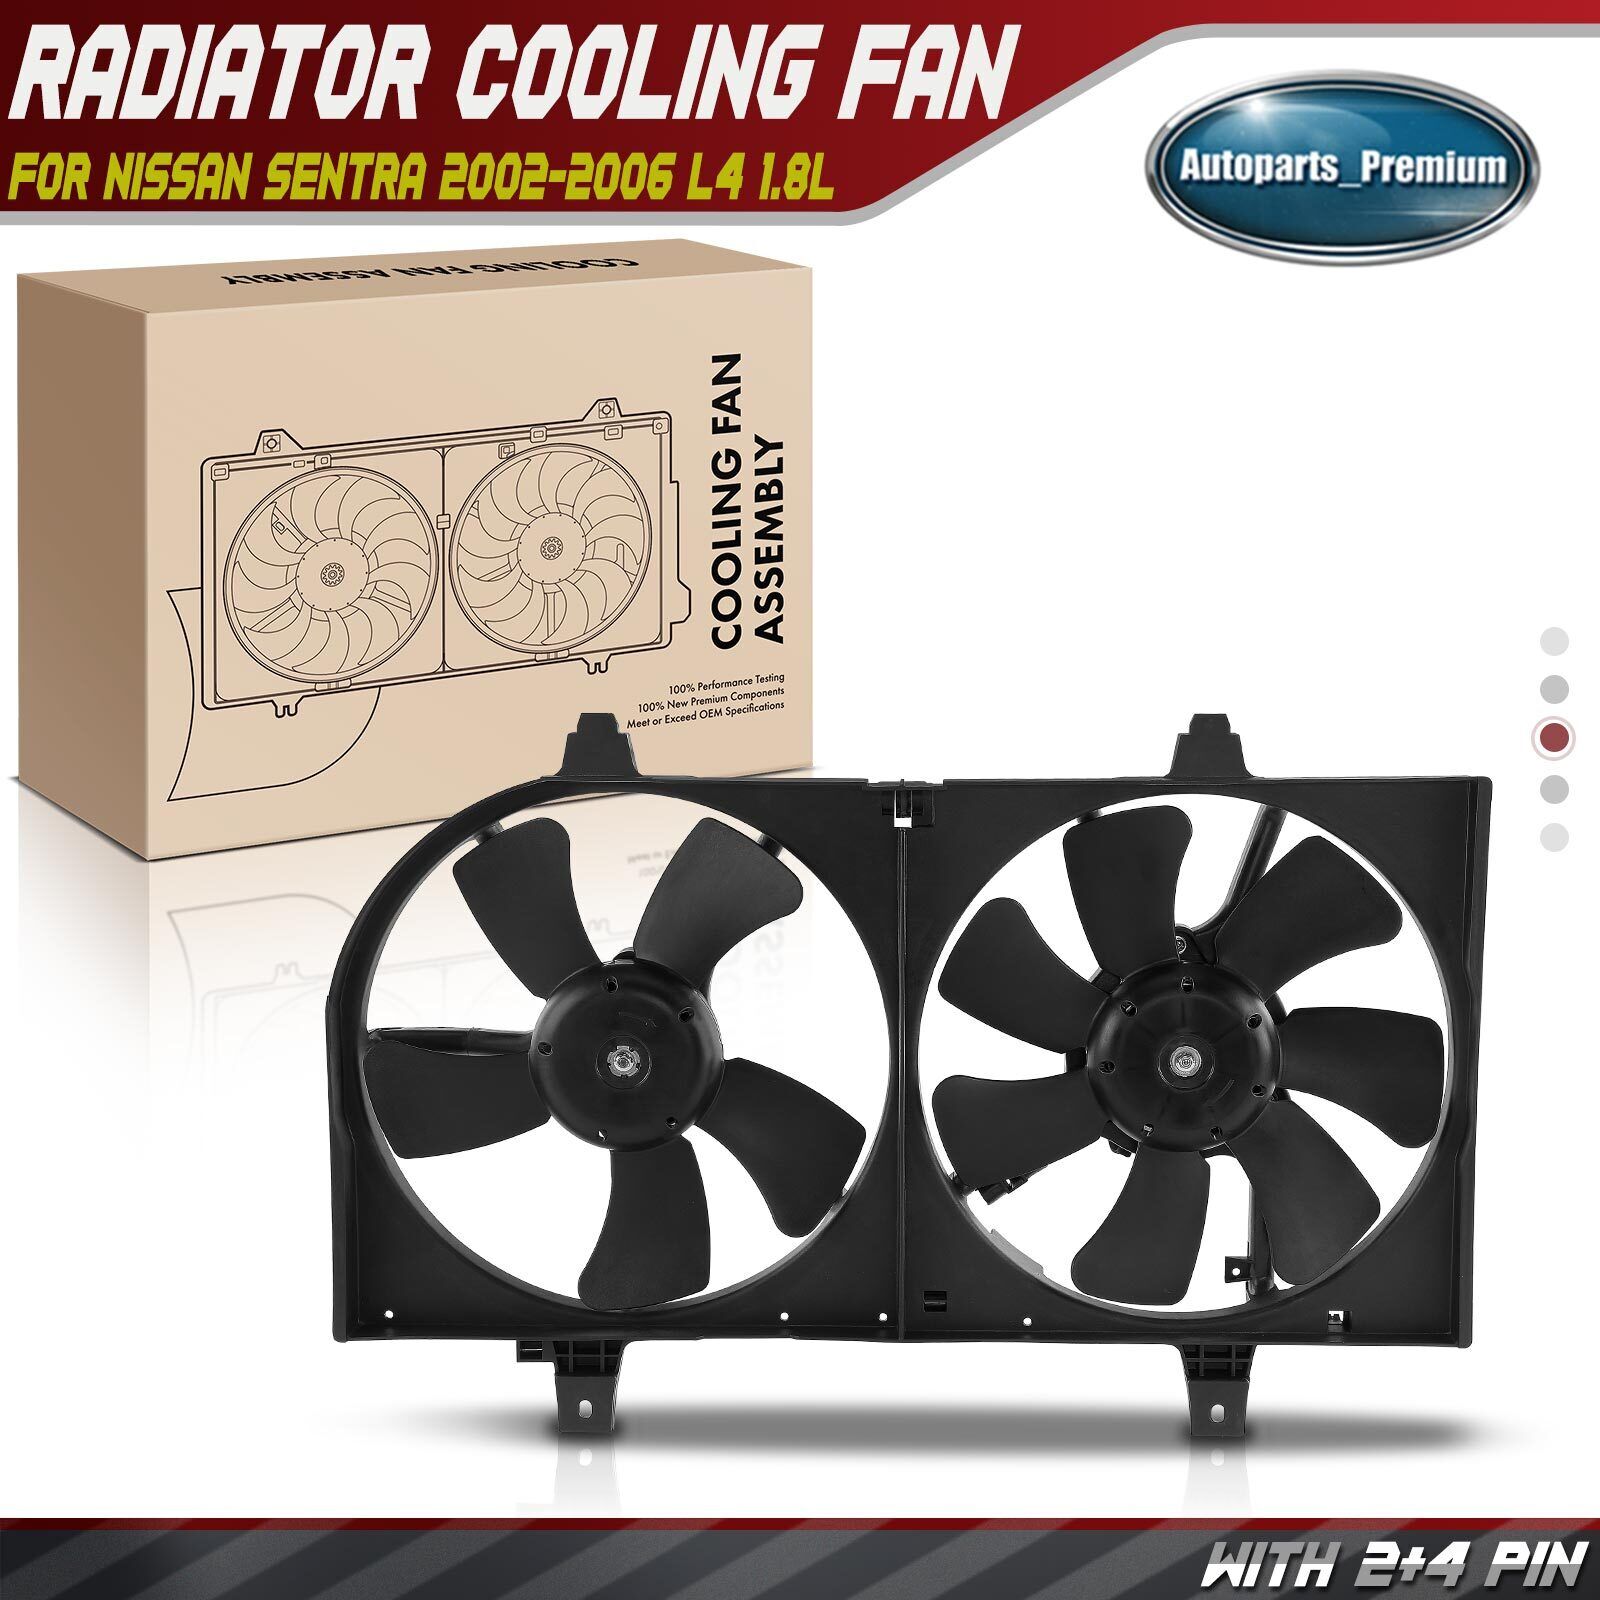 Dual Engine Radiator Cooling Fan w/ Shroud Assembly for Nissan Sentra 02-06 1.8L